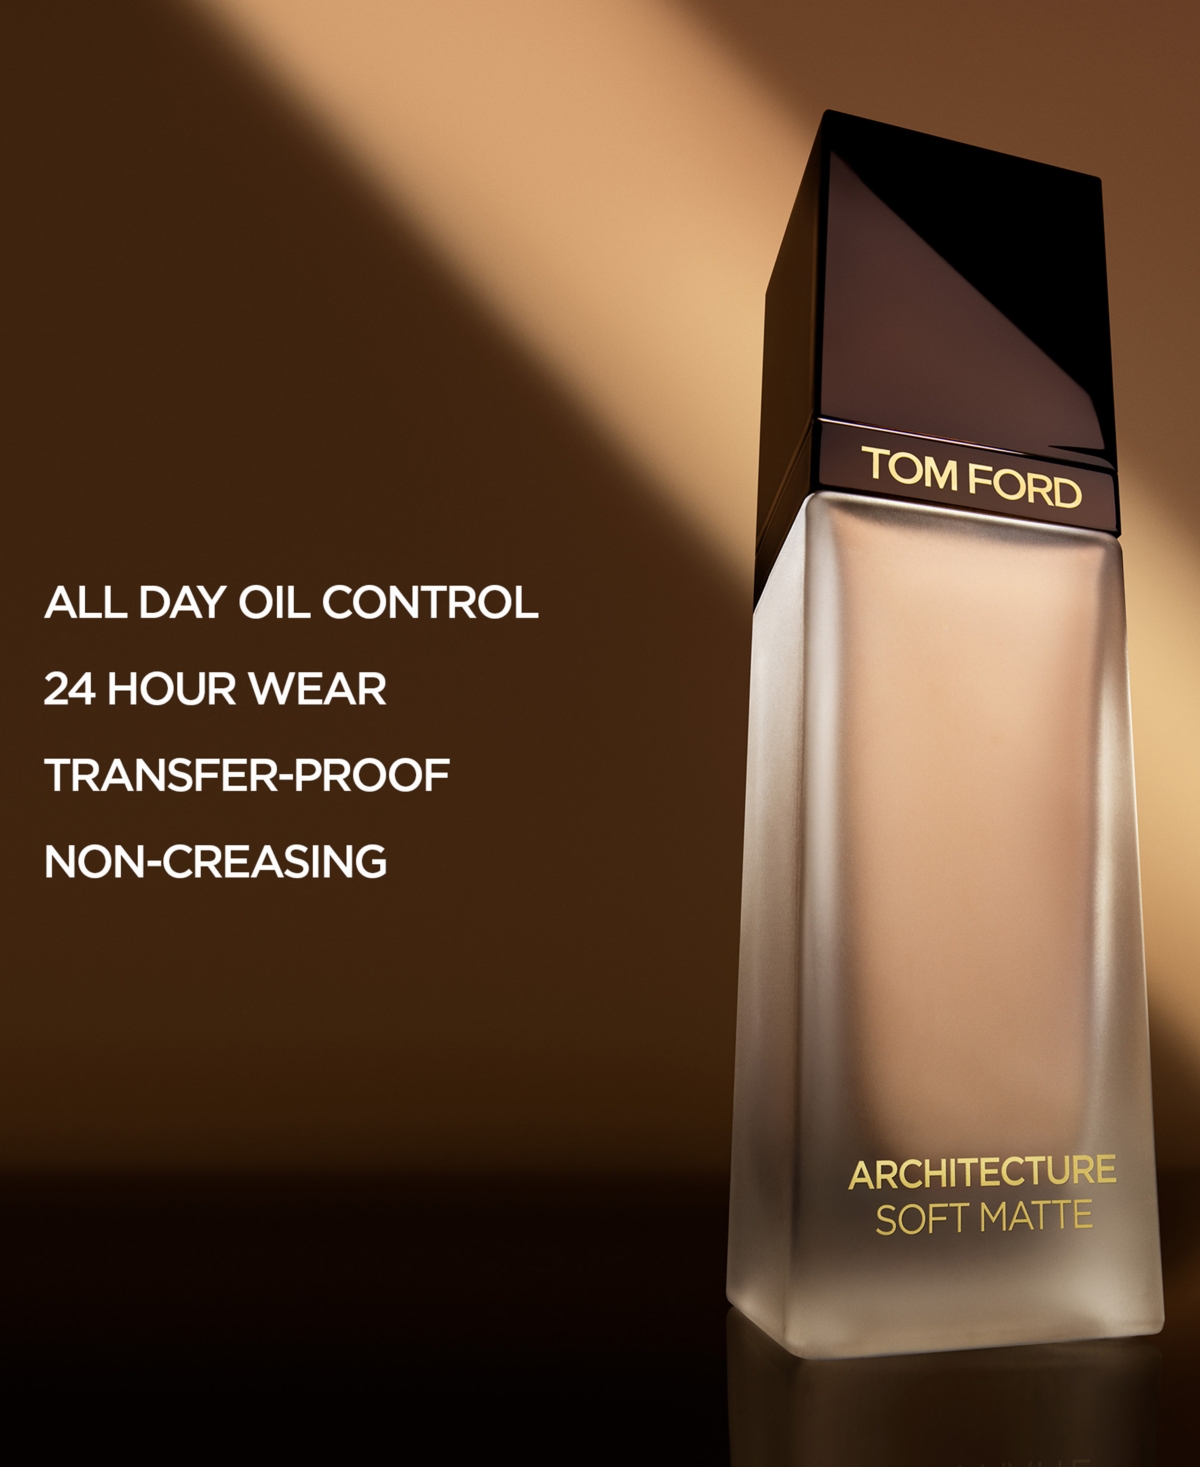 Shop Tom Ford Architecture Soft Matte Blurring Foundation In . Cameo - Very Fair